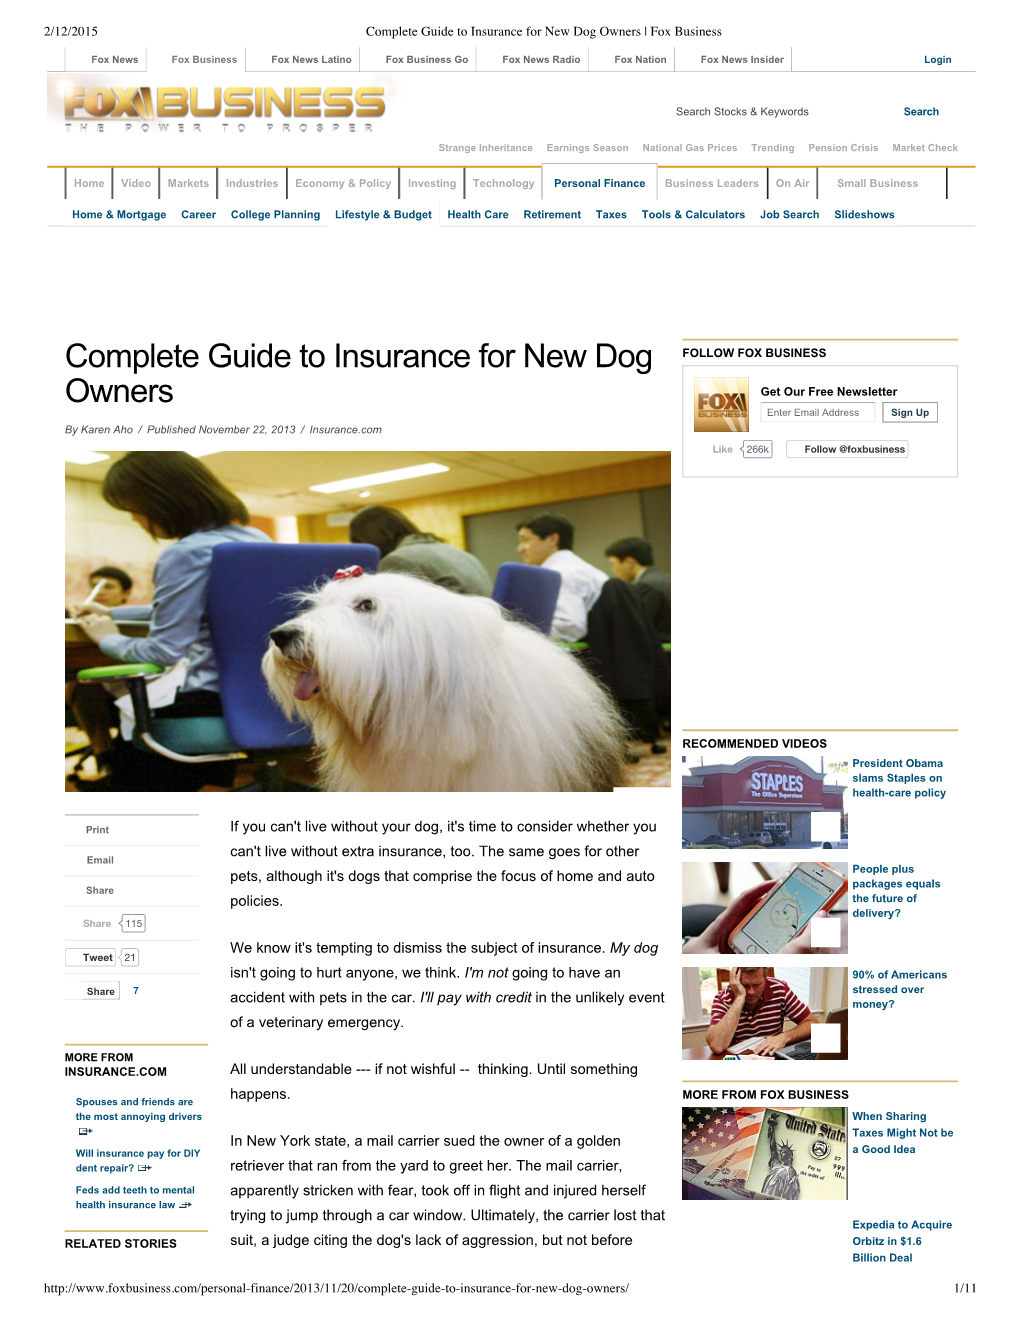 Complete Guide to Insurance for New Dog Owners | Fox Business